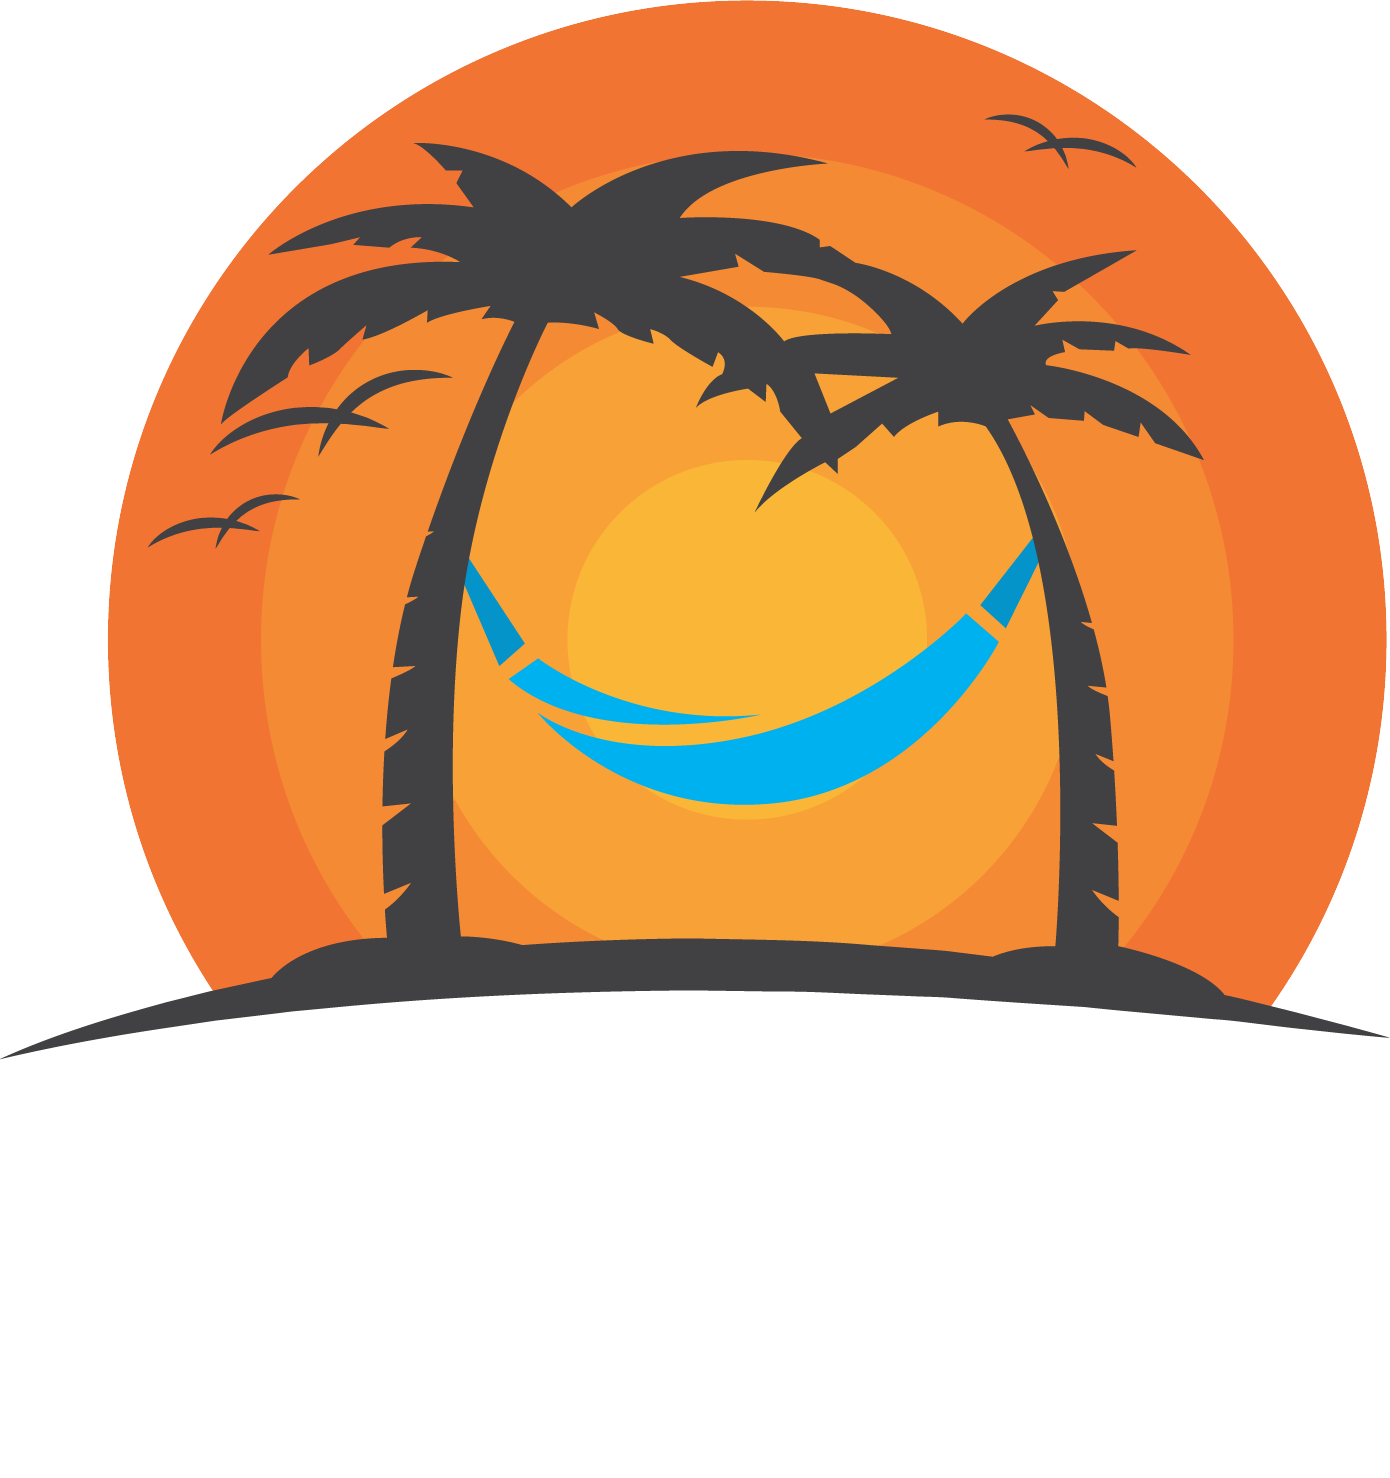 Make your holidays to Sri Lanka memorable and stress-free with Delux Holidays, best tour operators to Sri Lanka.